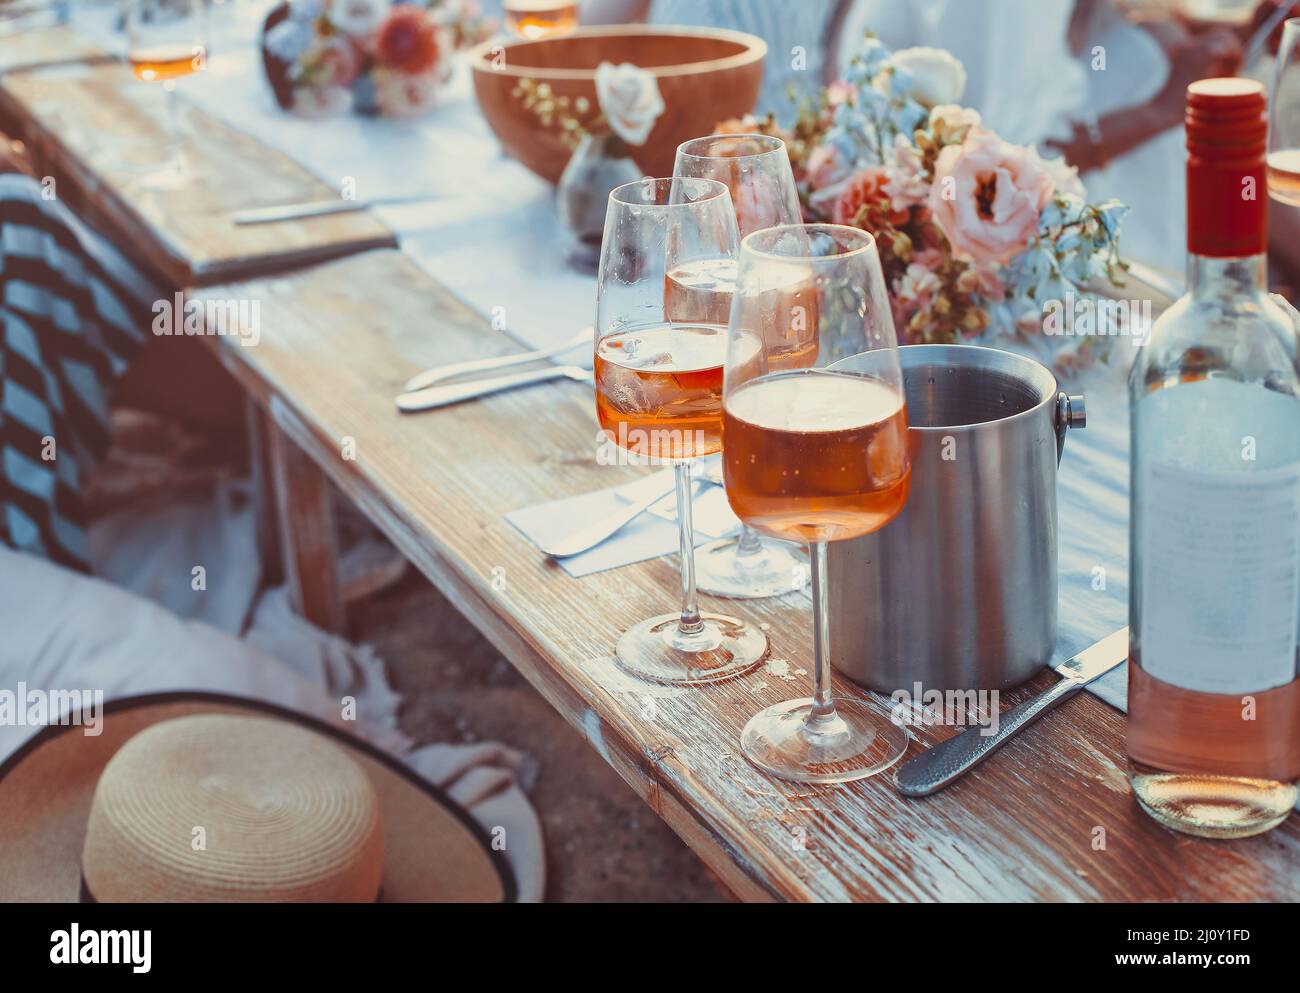 Delicious food and flowers for outdoor summer picnic Stock Photo